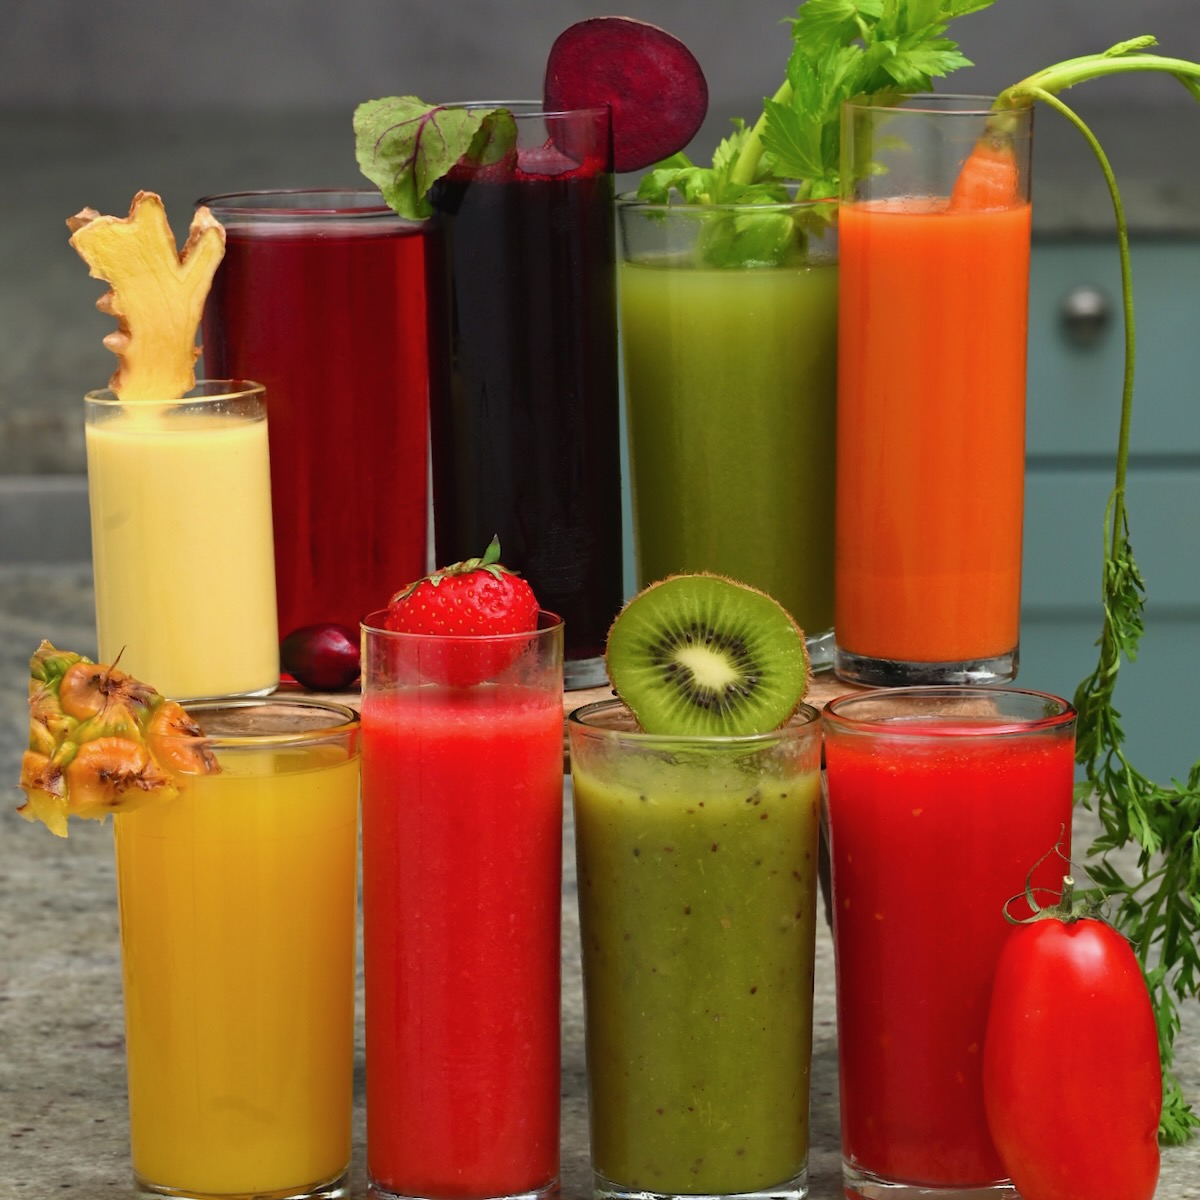 https://www.alphafoodie.com/wp-content/uploads/2022/11/Juicing-Guide-square.jpeg